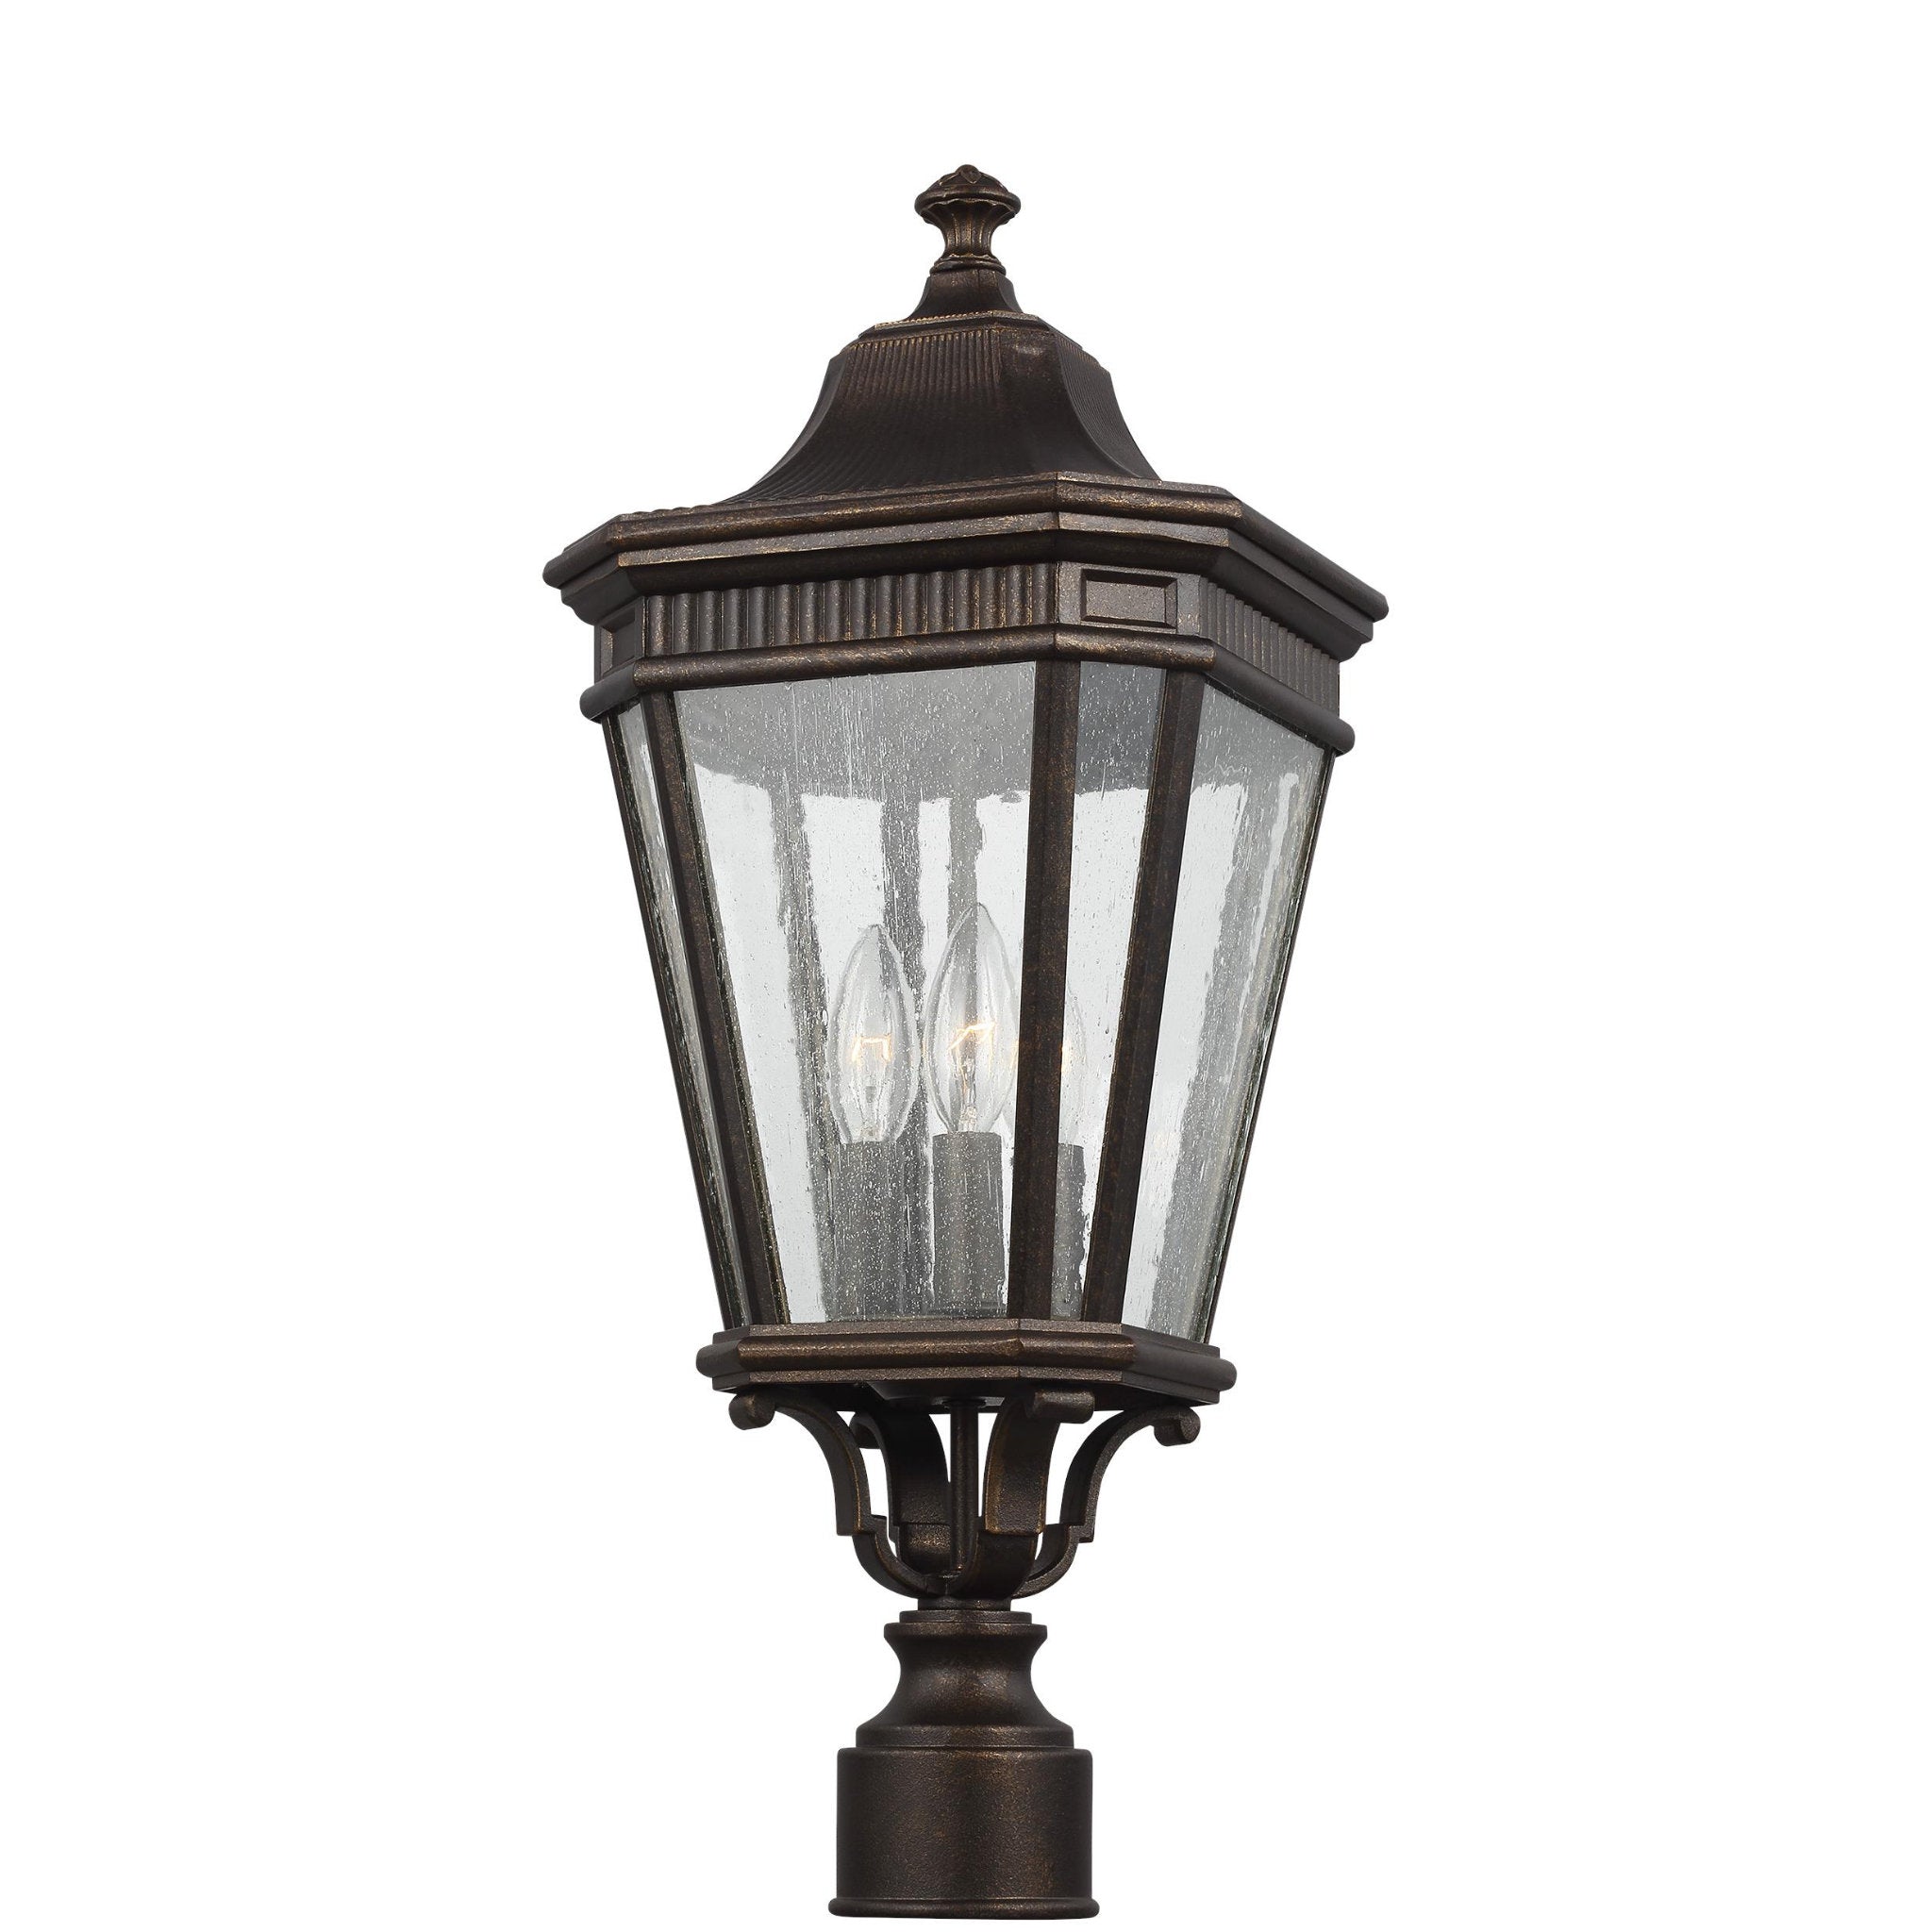 Cotswold Lane Small Post Lantern Traditional Outdoor Fixture 9.5" Width 22.5" Height Aluminum Irregular Clear Seeded Shade in Grecian Bronze